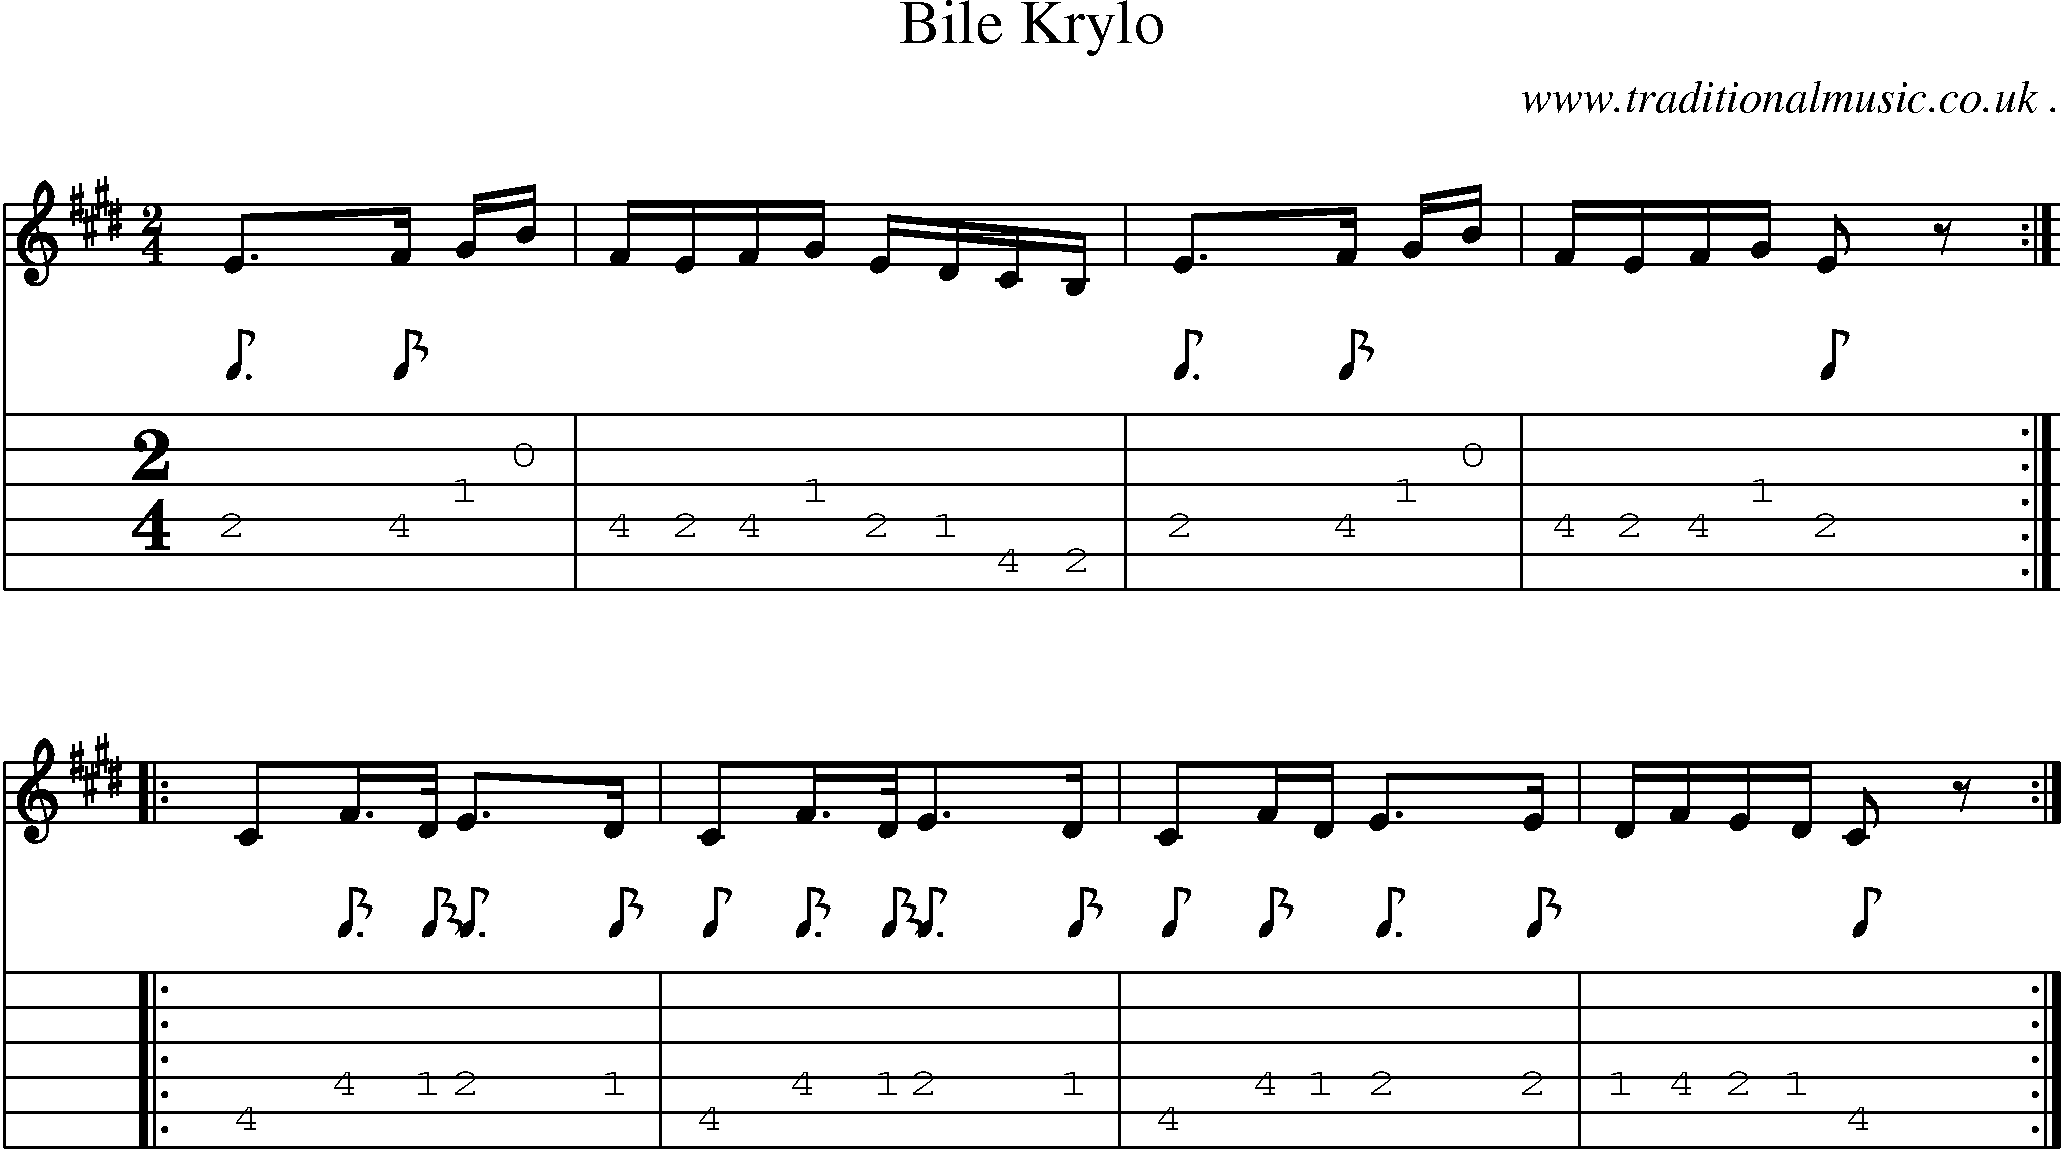 Sheet-Music and Guitar Tabs for Bile Krylo